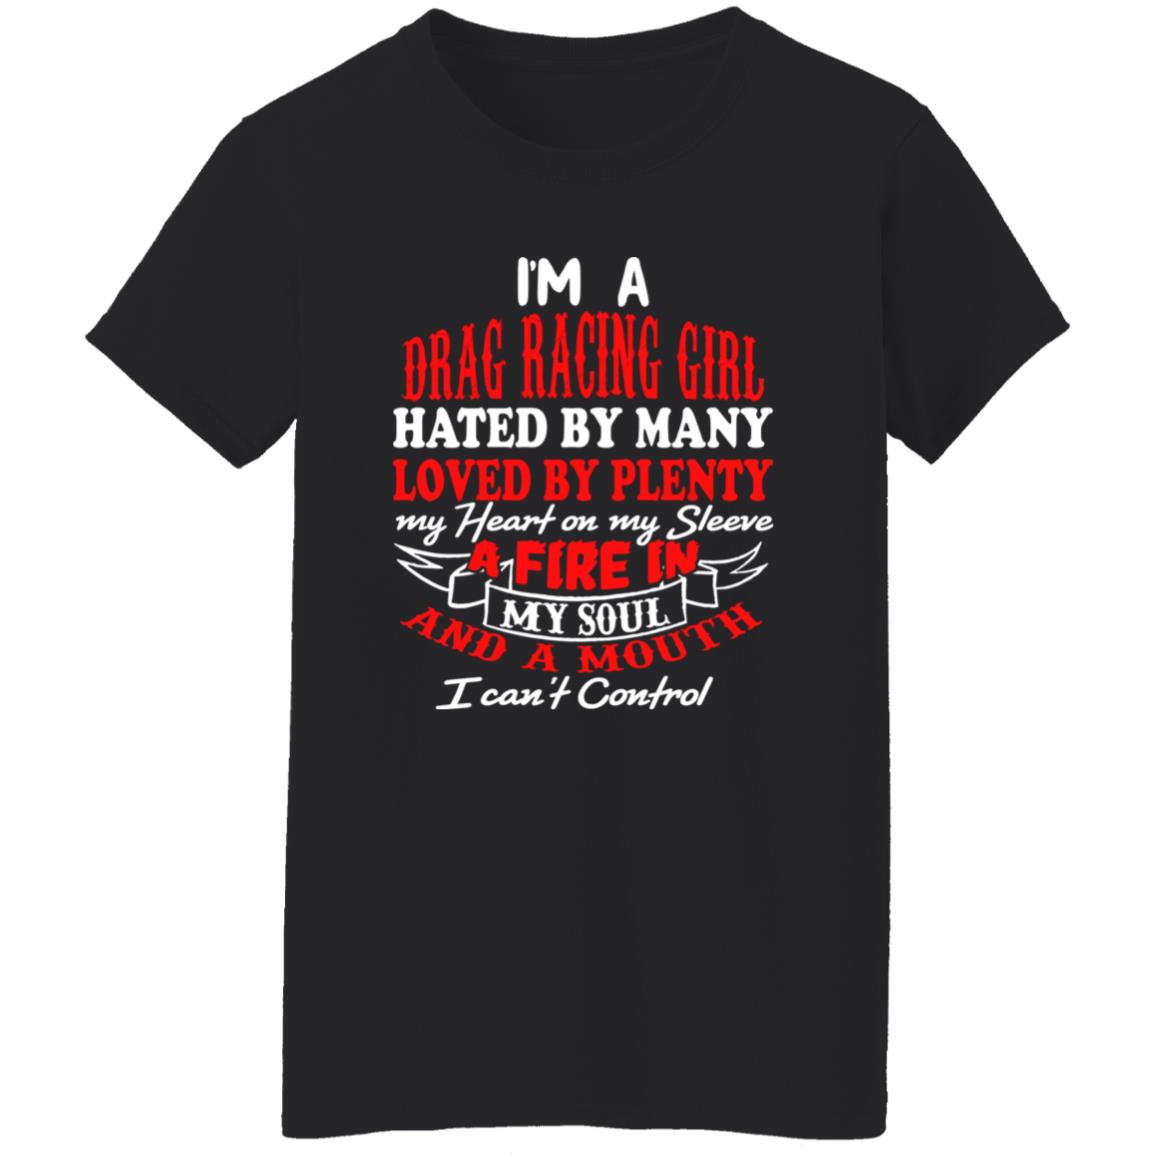 I'm A Drag Racing Girl Hated By Many Loved By Plenty Ladies' 5.3 oz. T-Shirt